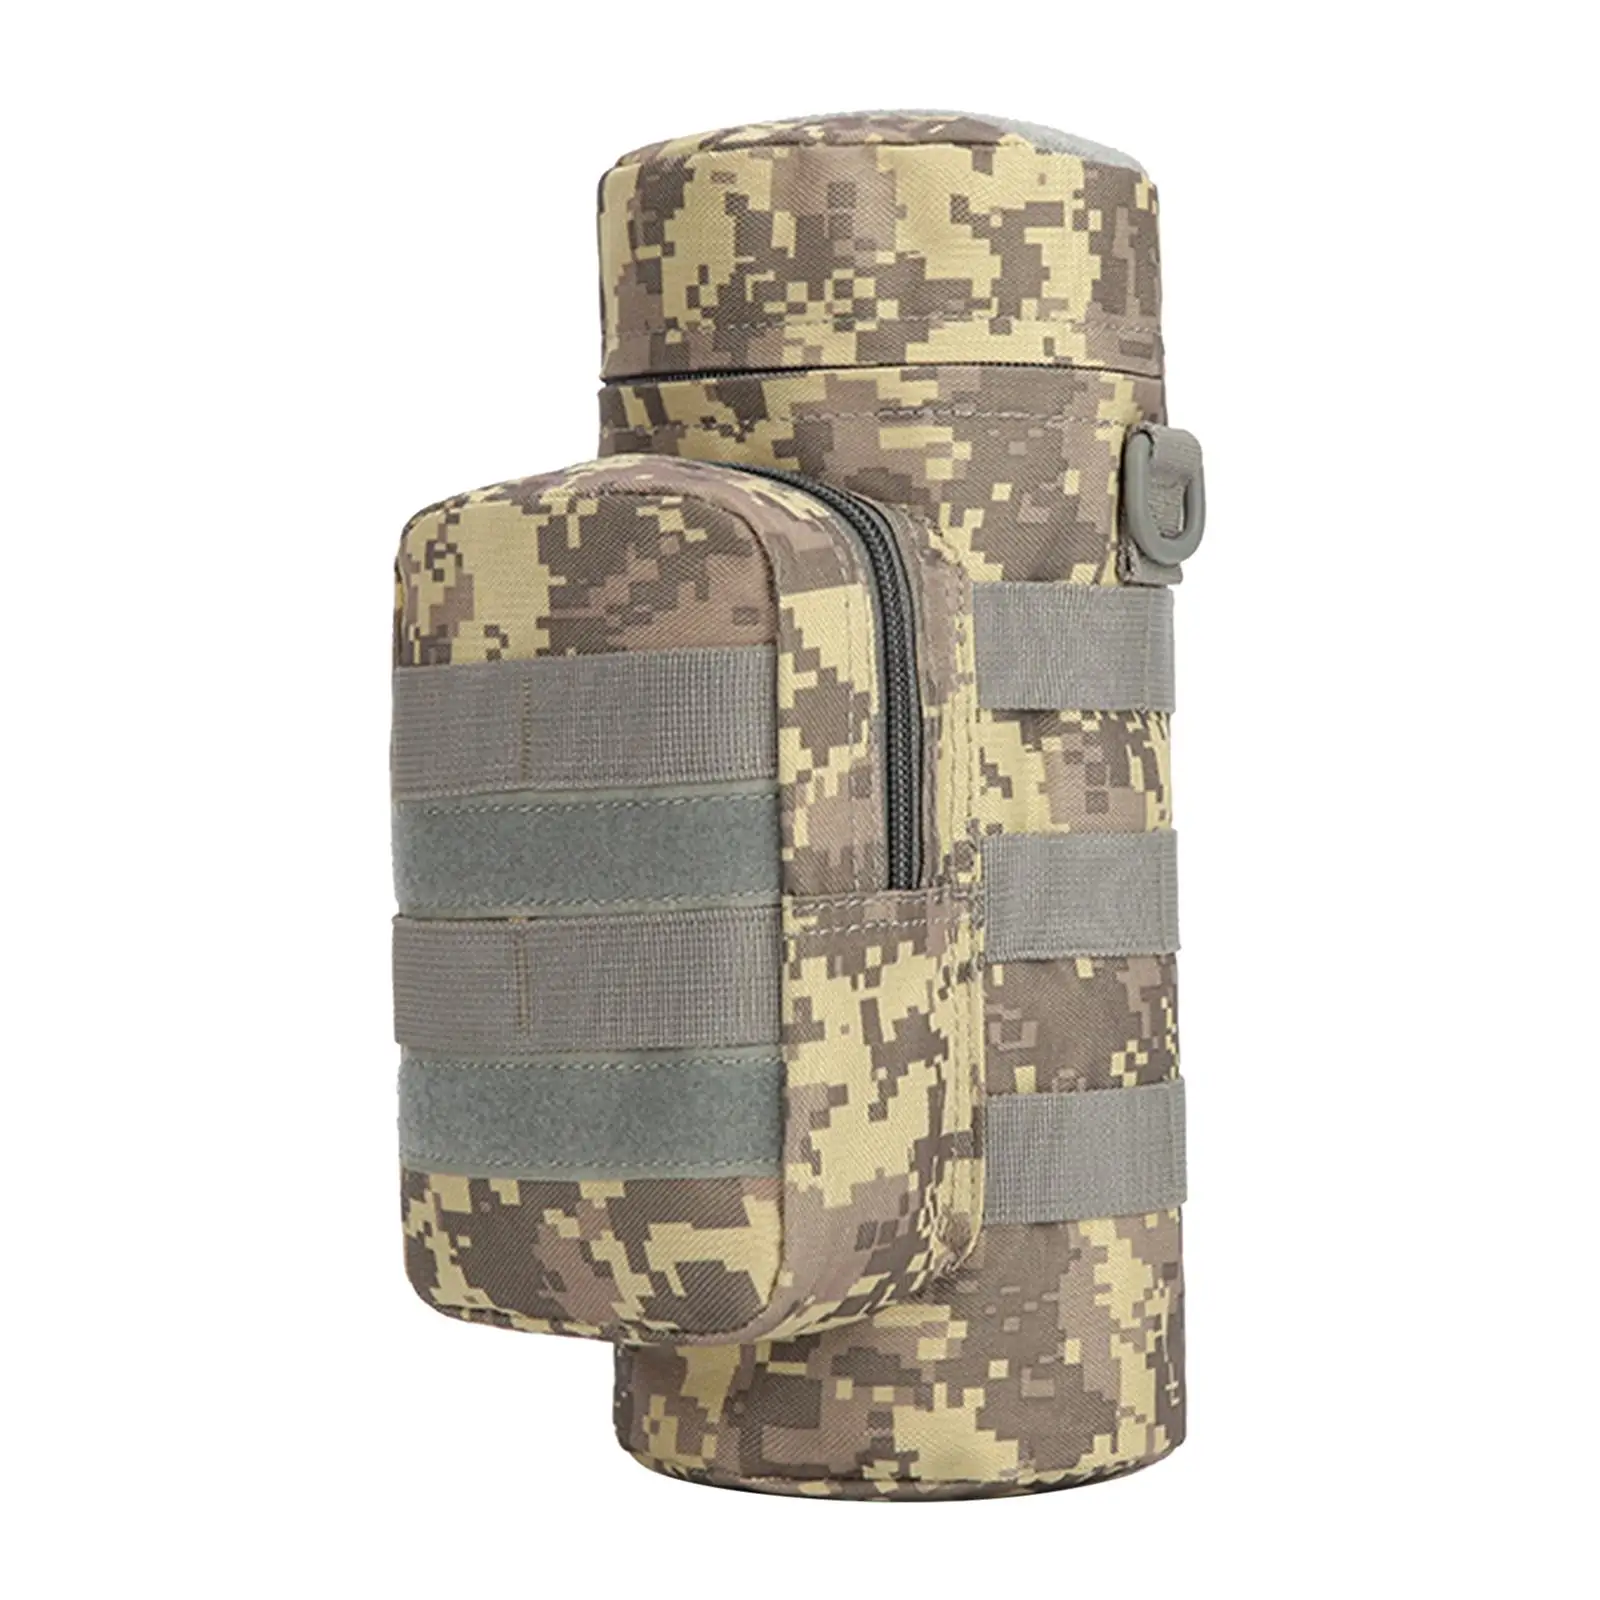 Travel Tool Kettle Set Outdoor Tactical Military Molle Water Bag For Camping Hiking Fishing Shoulder Bottle Holder Bottle Pouch